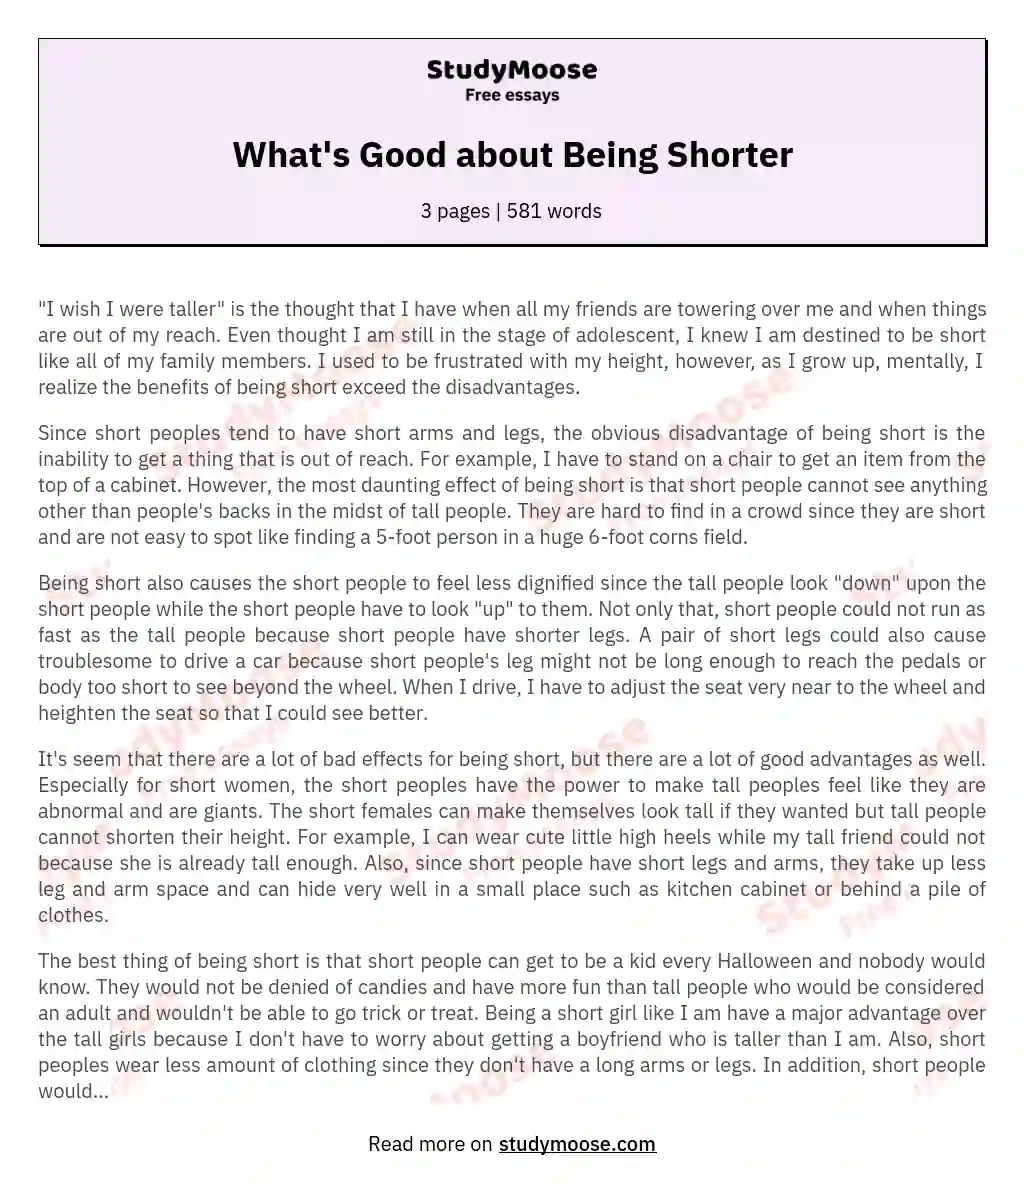 What's Good about Being Shorter essay